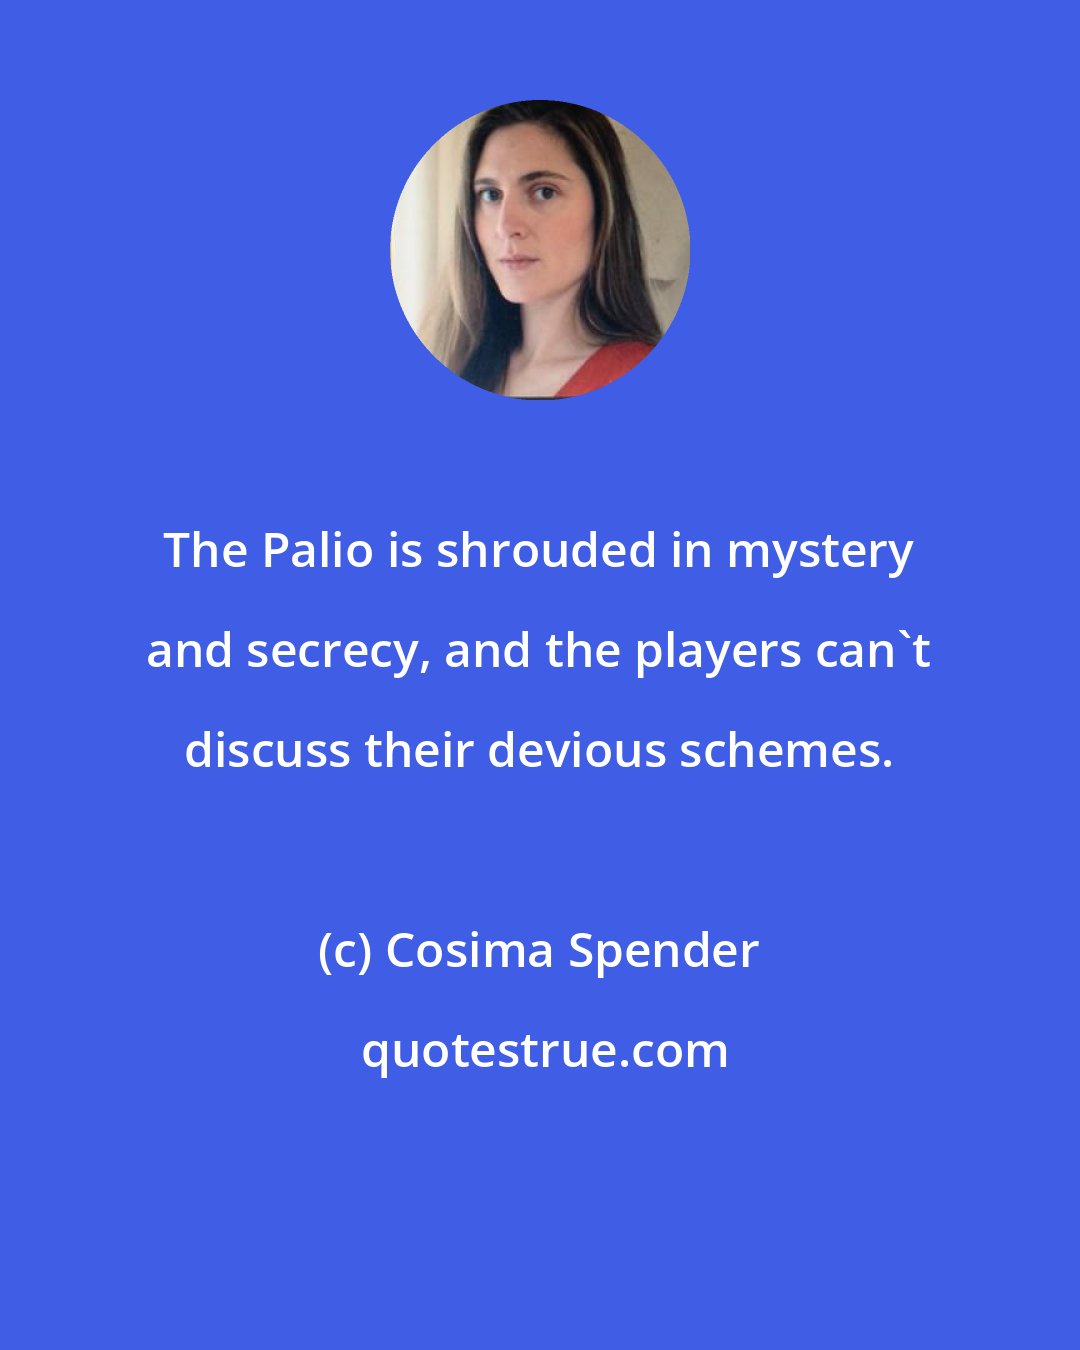 Cosima Spender: The Palio is shrouded in mystery and secrecy, and the players can't discuss their devious schemes.